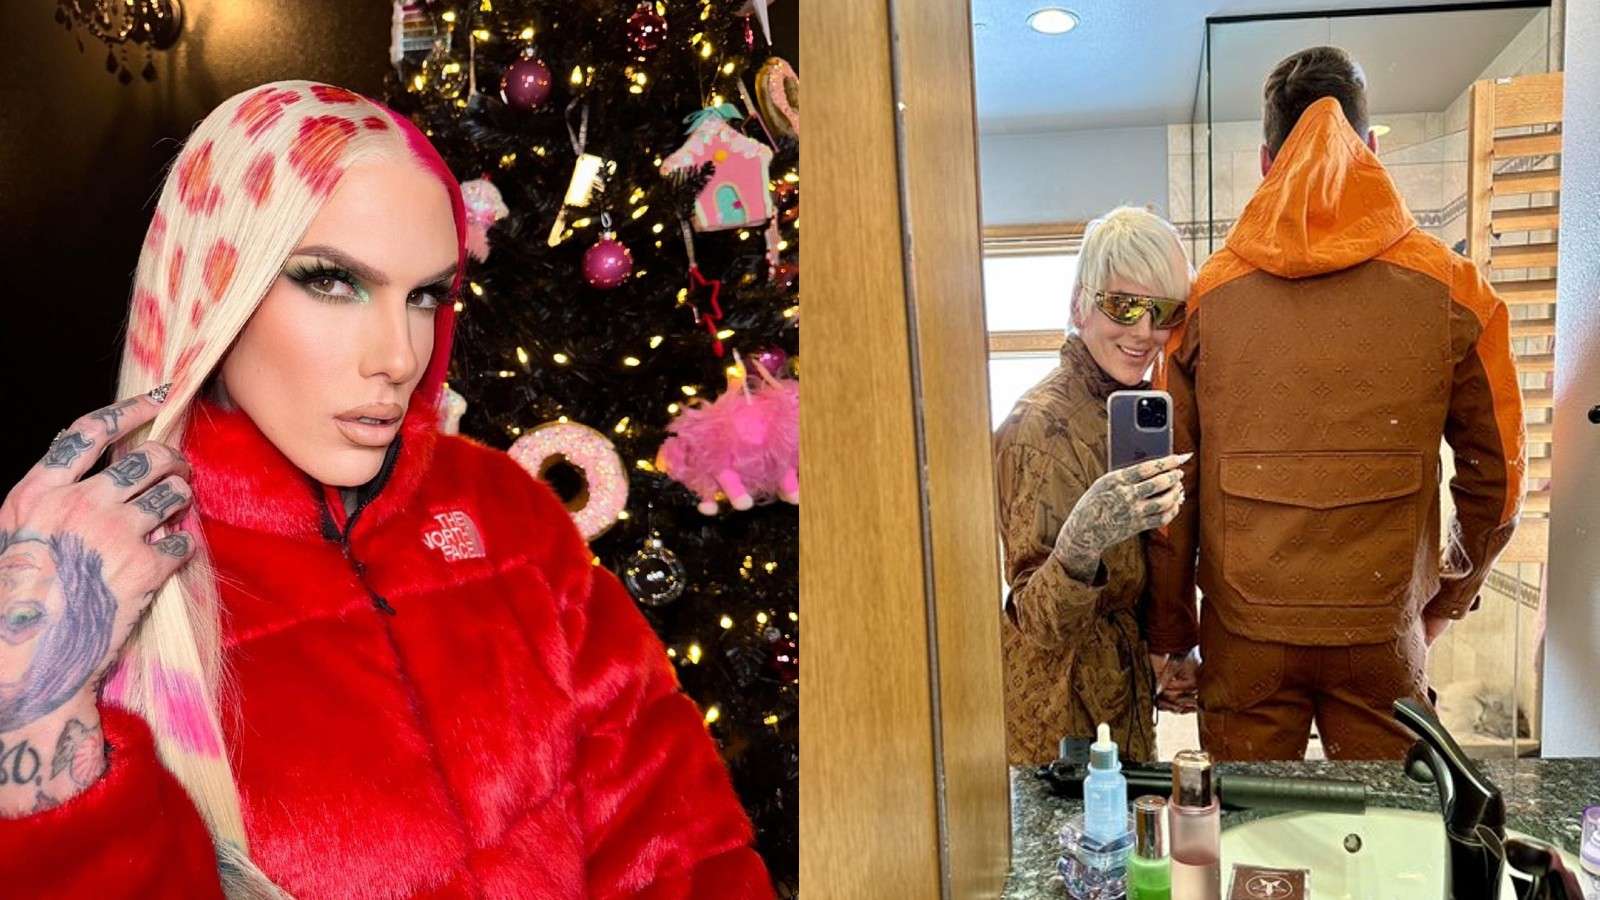 Jeffree Star Reveals He's Had Sex With Some Popular Rappers & Athletes